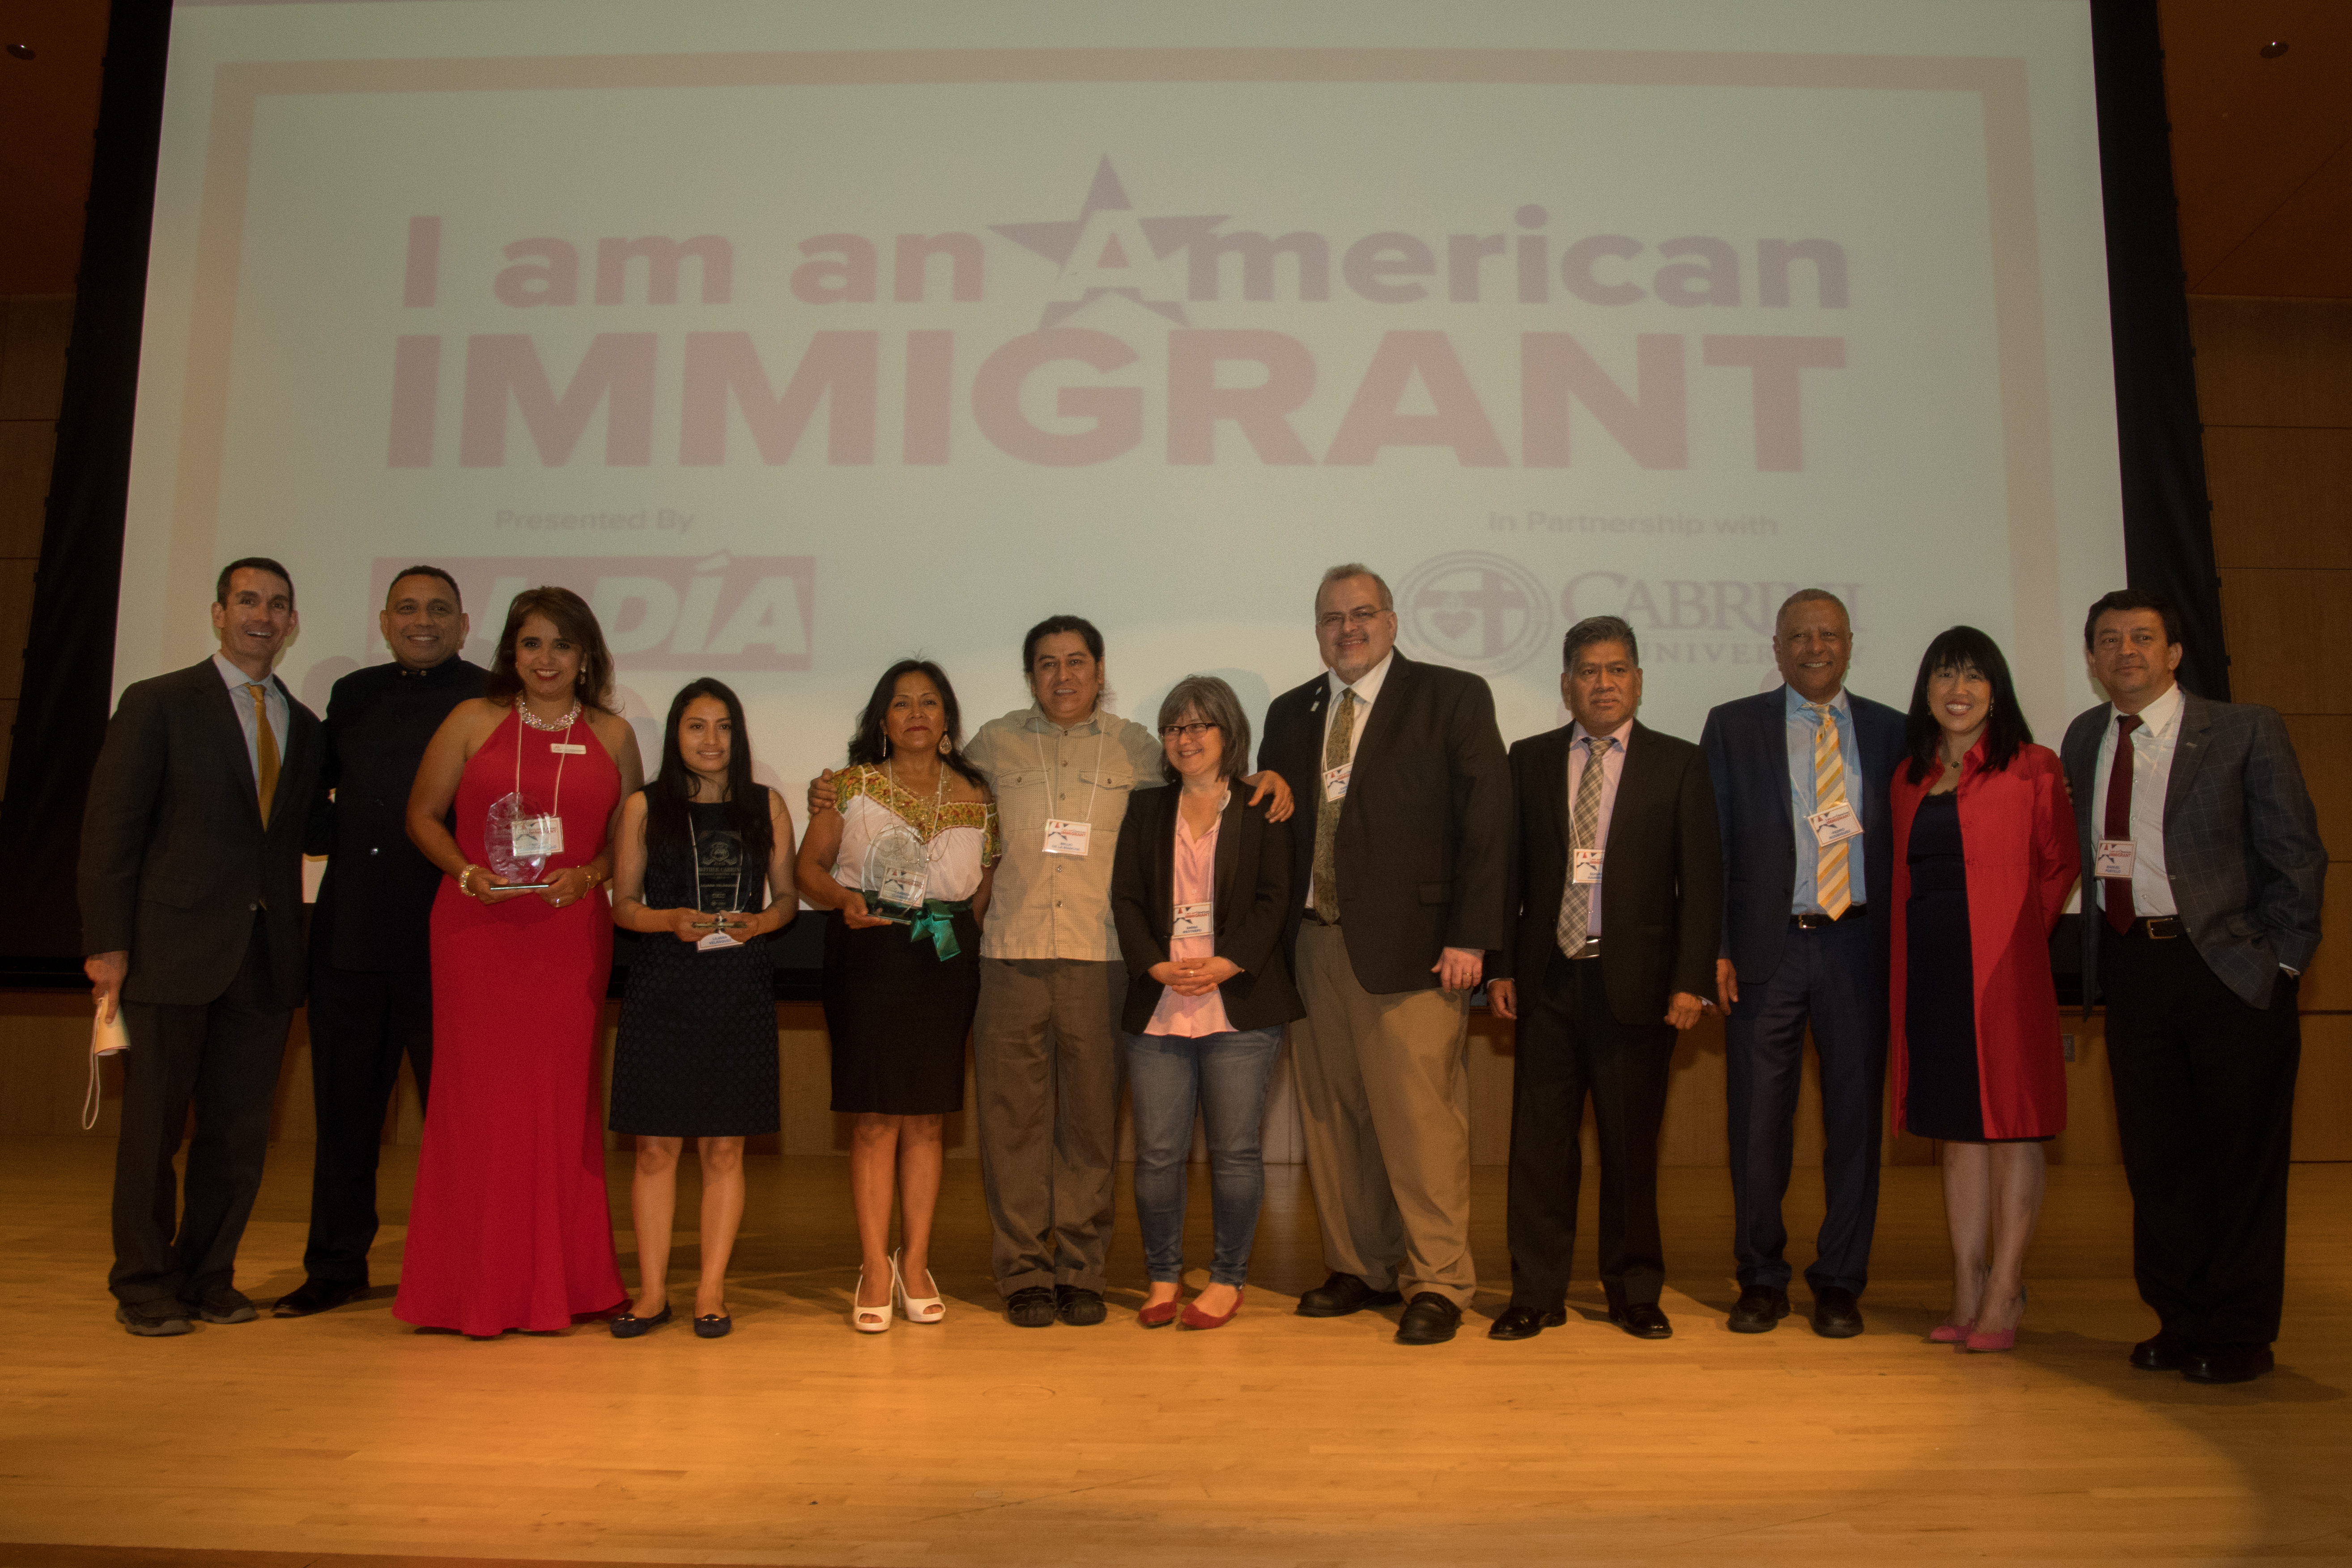 The honorees of the I am an American Immigrant project pose with Pennsylvania Auditor General Eugene DePasquale and Philadelphia Councilwoman Helen Gym. (Simón Bolívar)